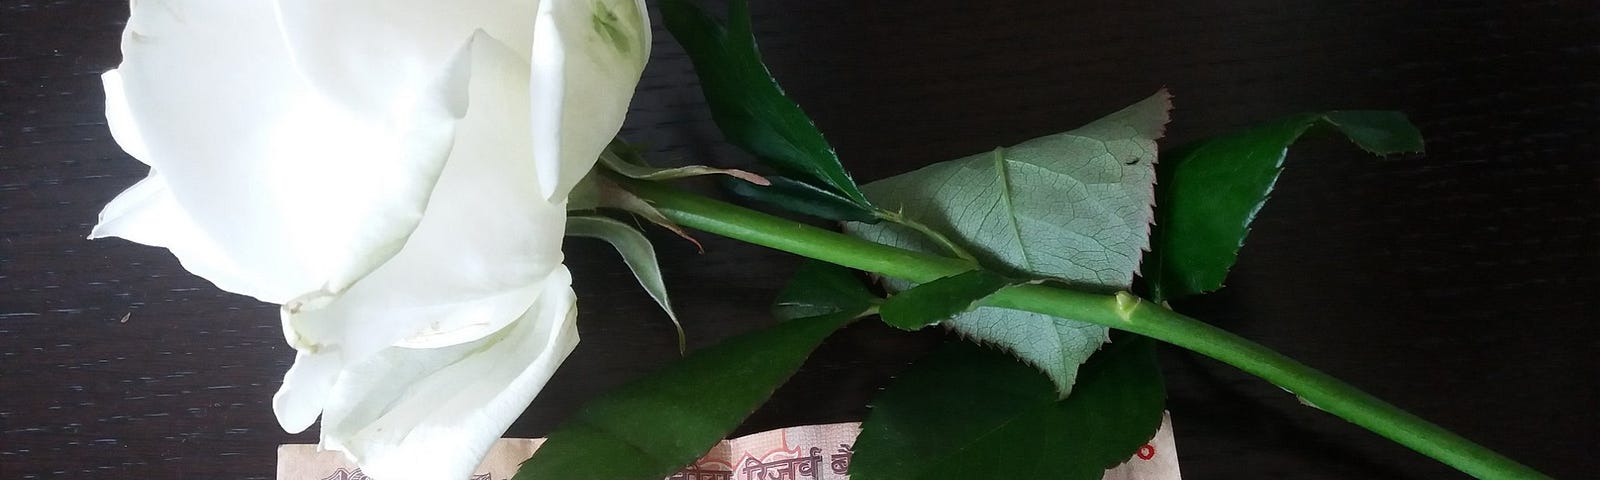 A ten-rupee note and a white rose.